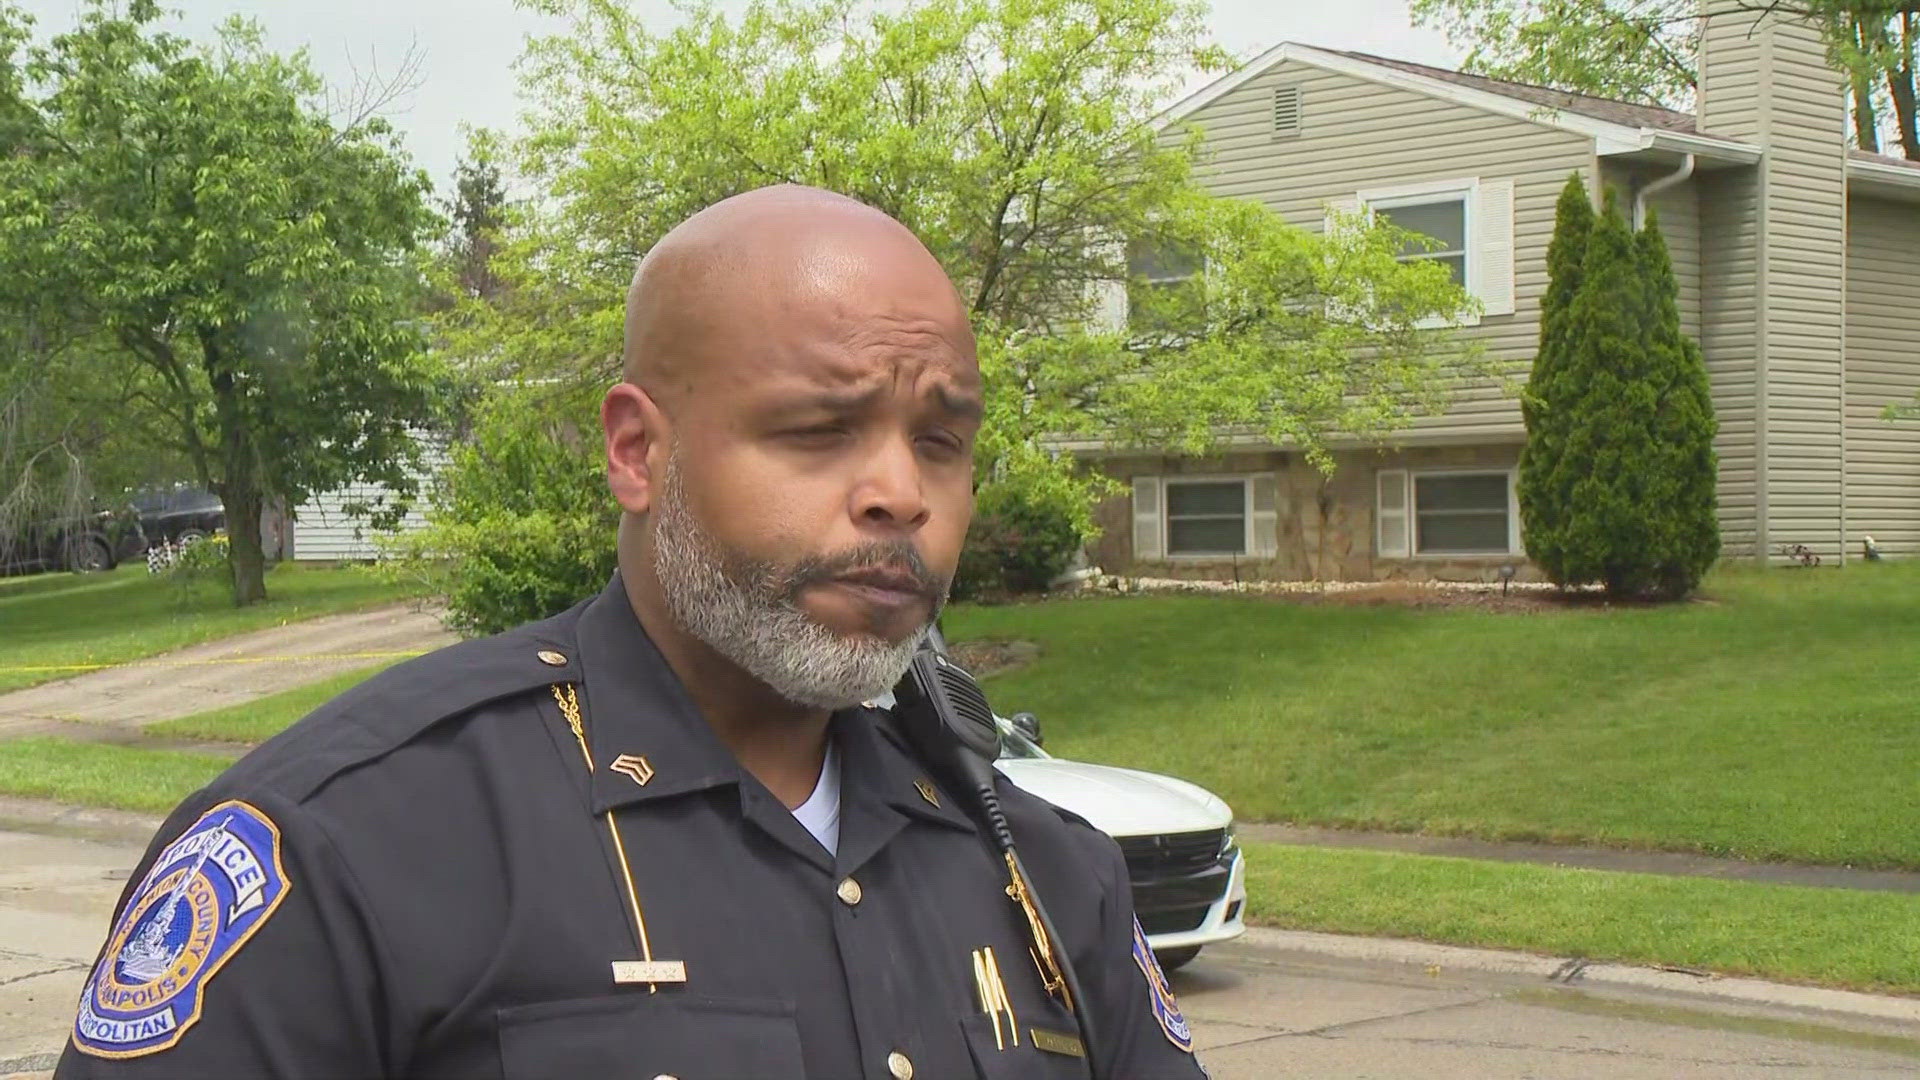 IMPD Sgt. Anthony Patterson provides an update on Wednesday's officer-involved shooting in the 6300 block of Watercrest Way.